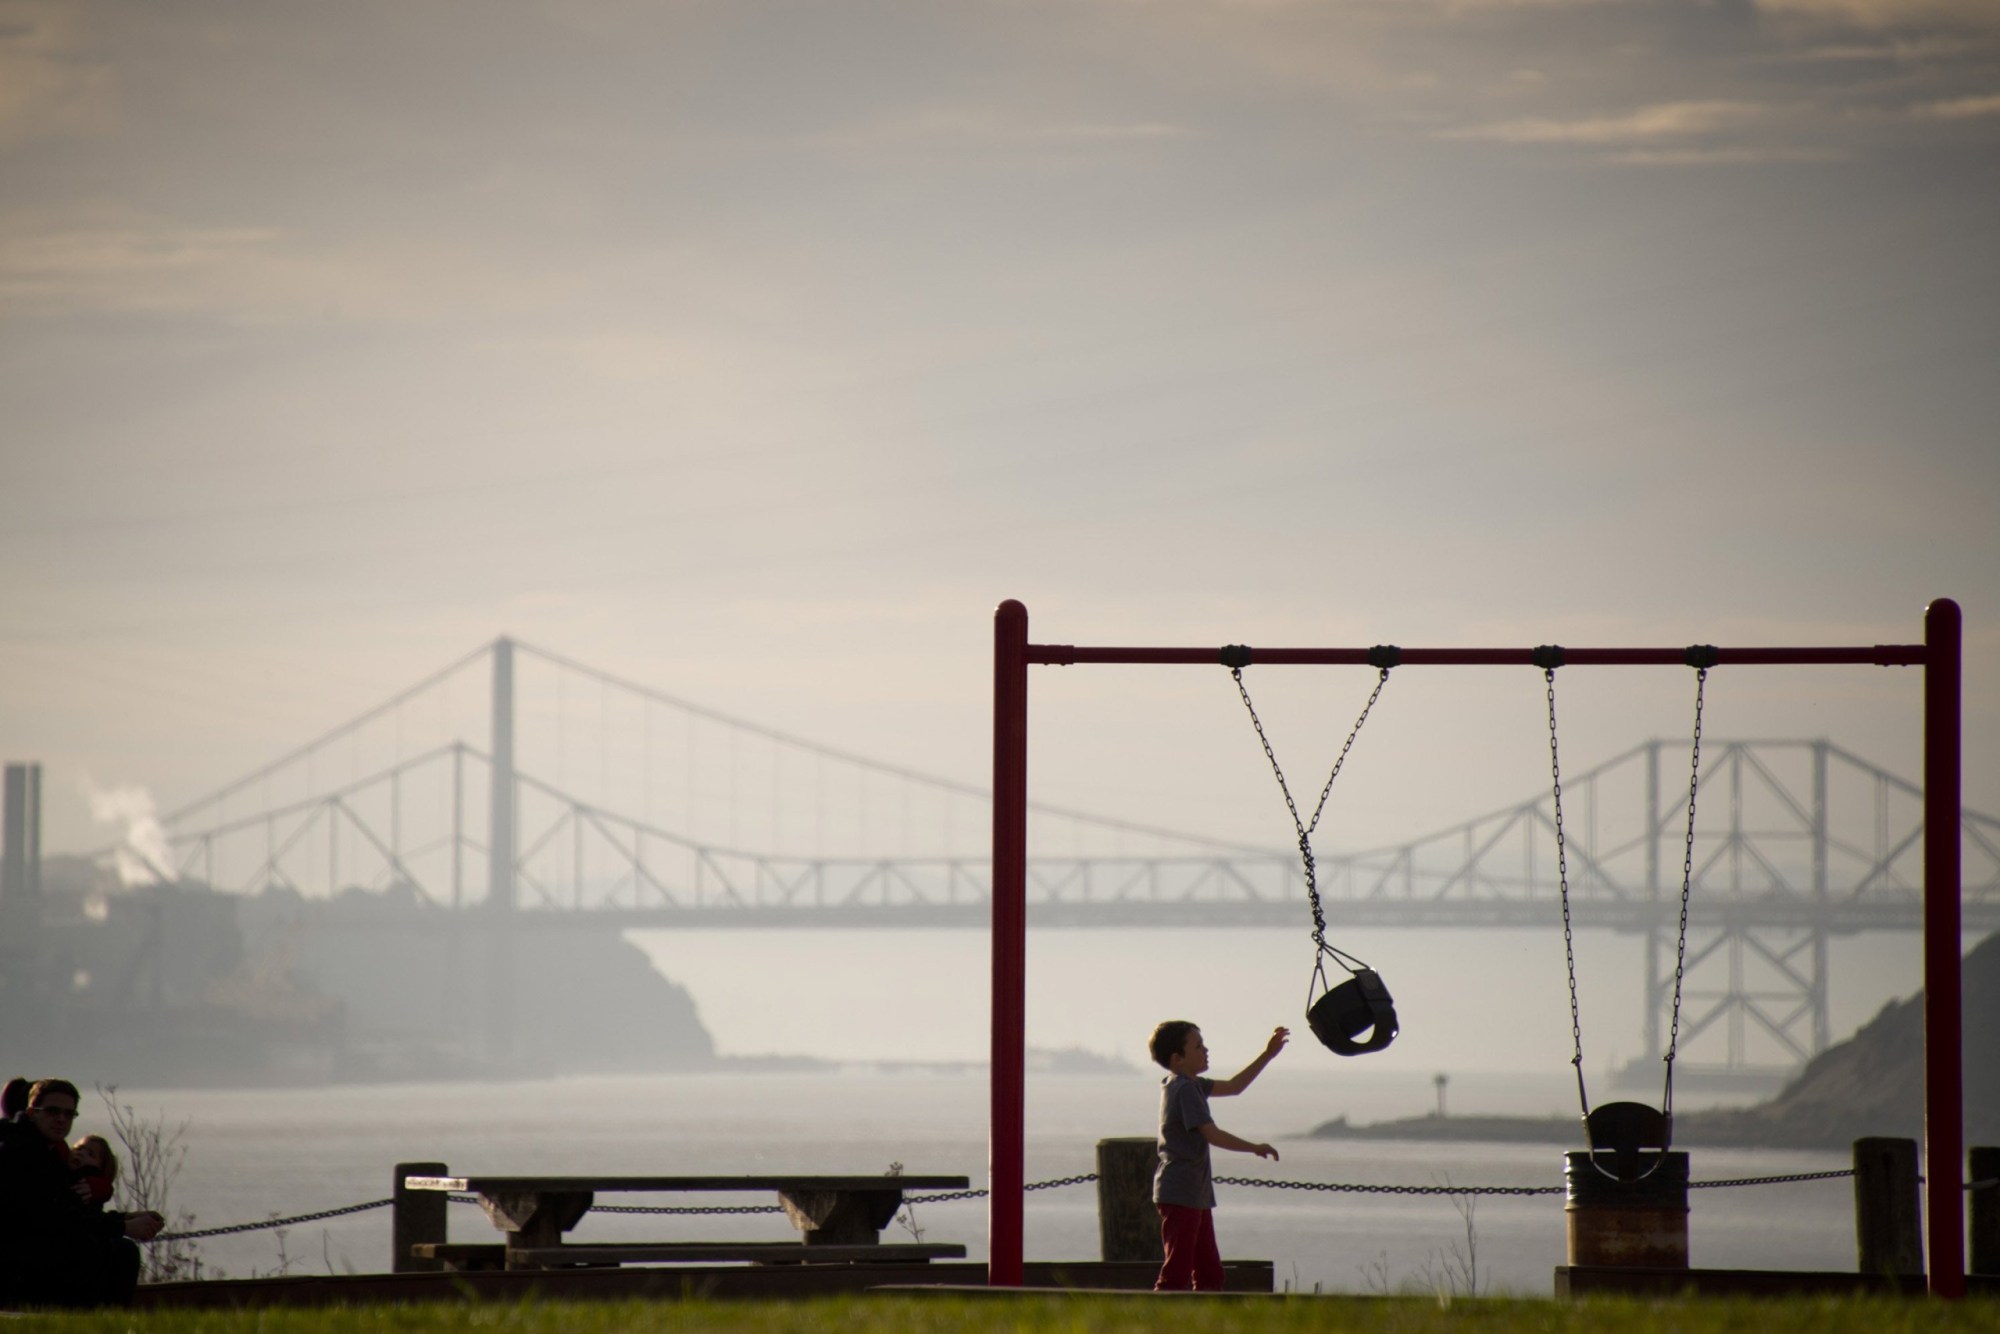 The Carquinez Bridge looms in the background of the playground area of the Ninth Street Park and Boat Launch in Benicia, Calif., Feb. 11, 2014. (Manny Crisostomo/Sacramento Bee/Tribune News Service via Getty Images)